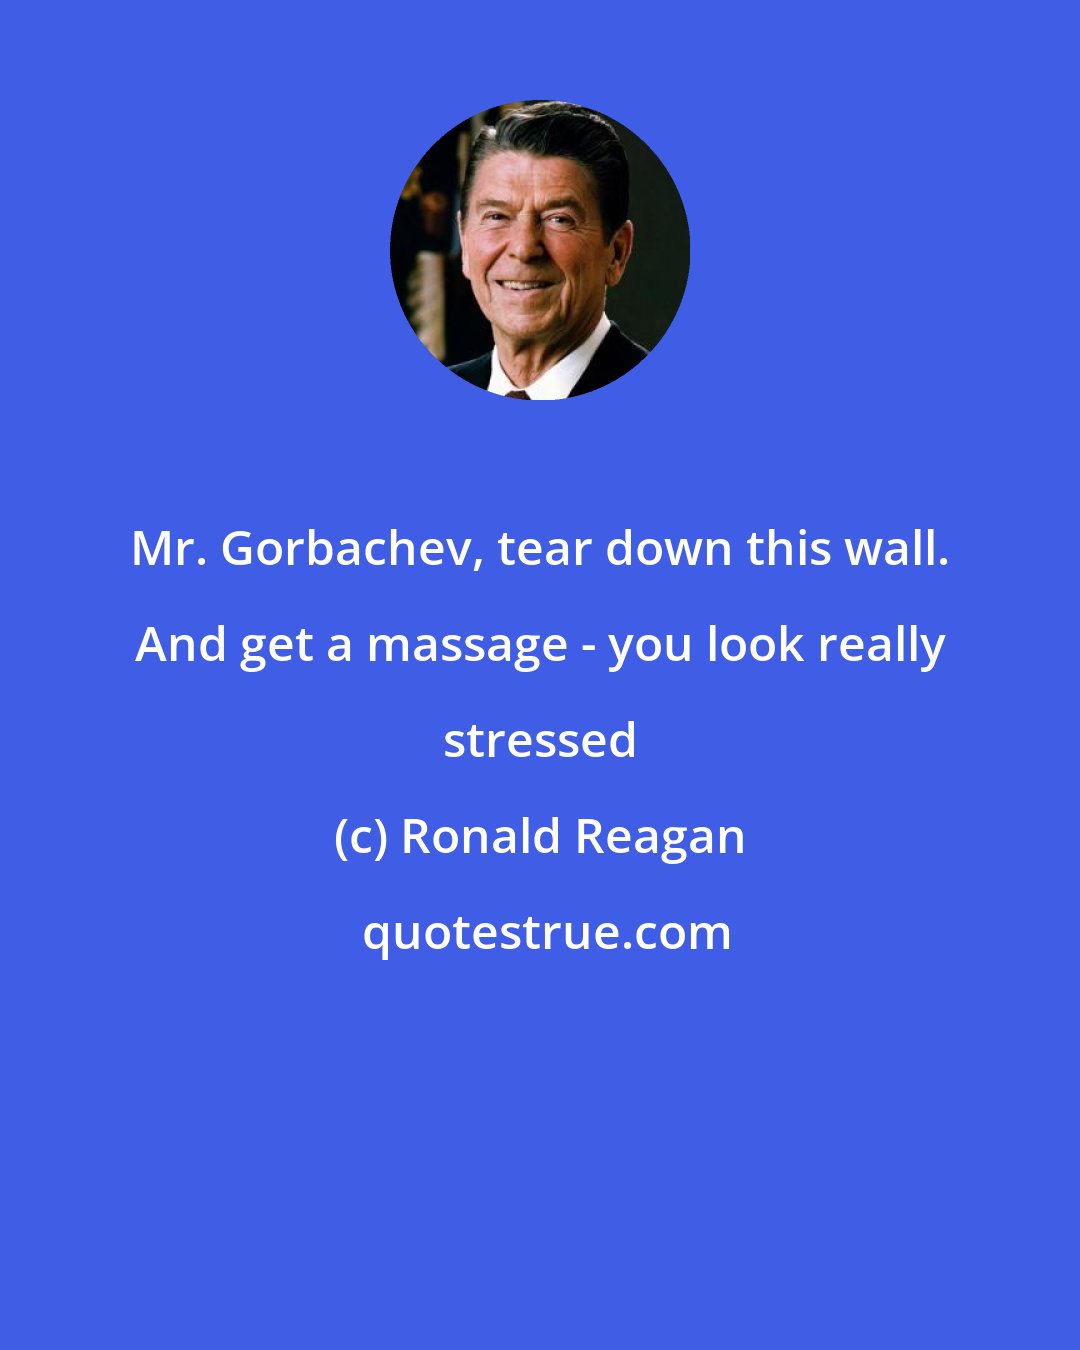 Ronald Reagan: Mr. Gorbachev, tear down this wall. And get a massage - you look really stressed